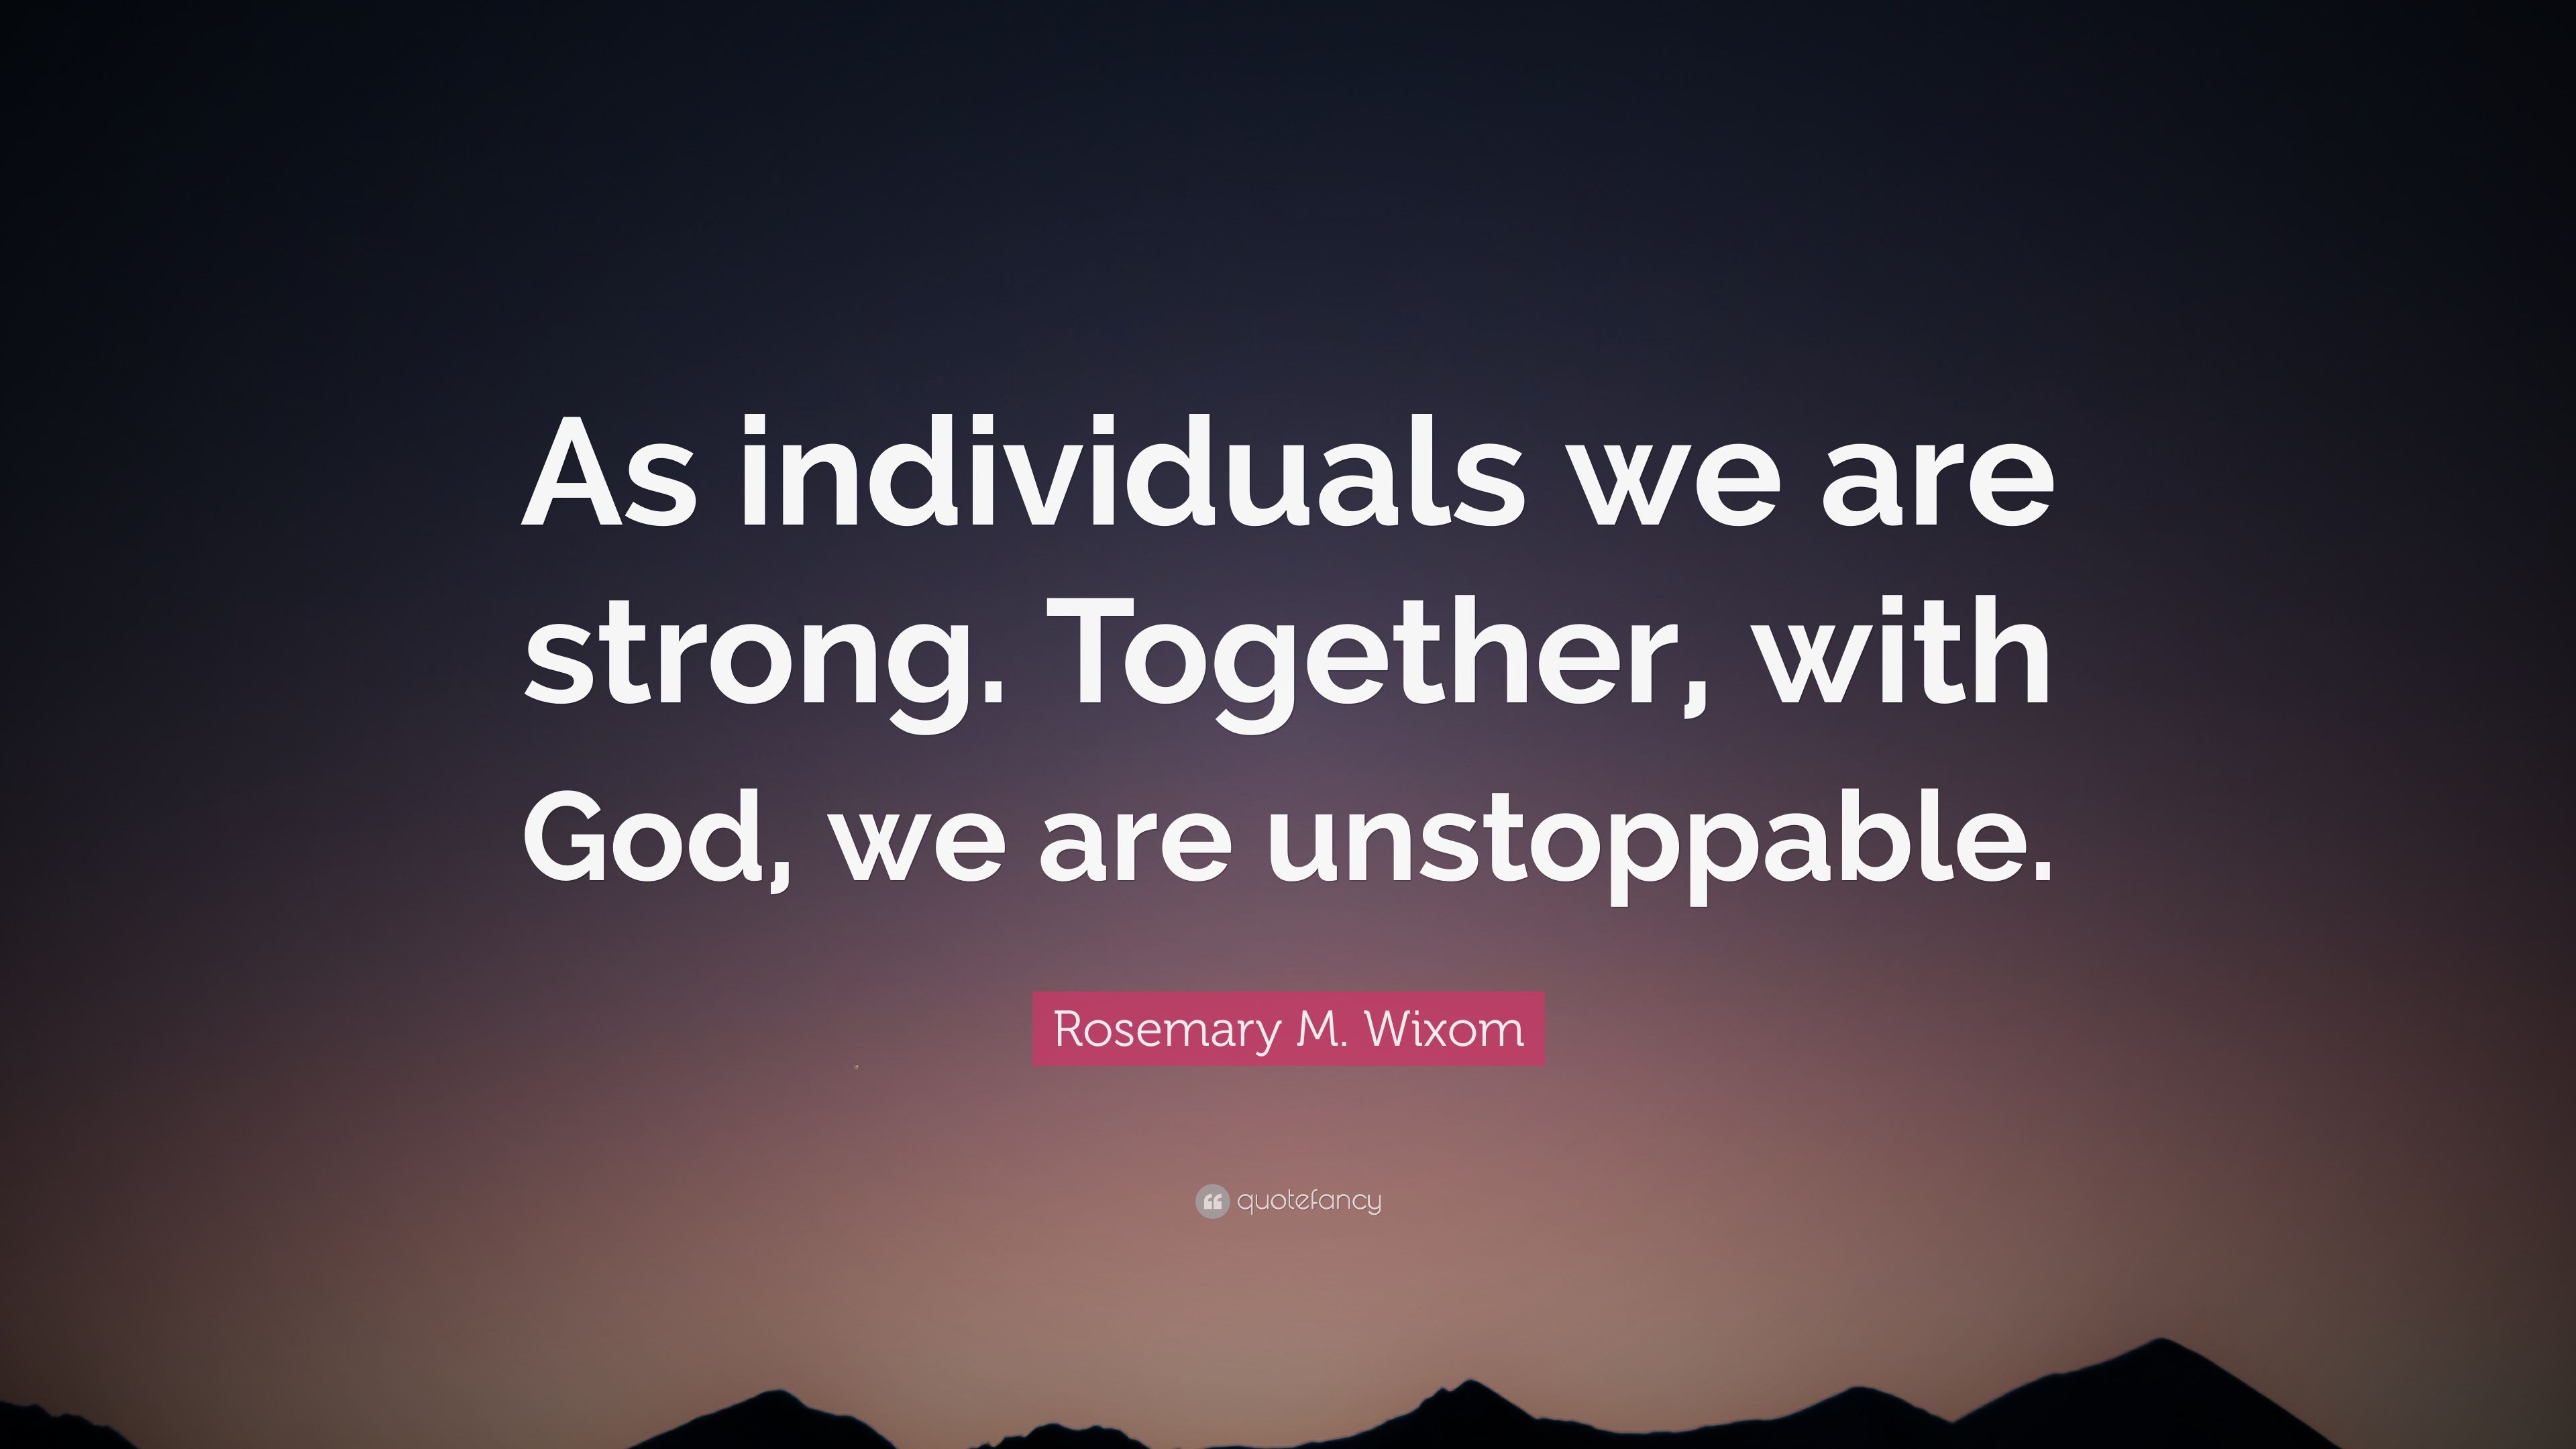 Rosemary M. Wixom Quote: “As individuals we are strong. Together, with God, we are unstoppable.” (12 wallpaper)